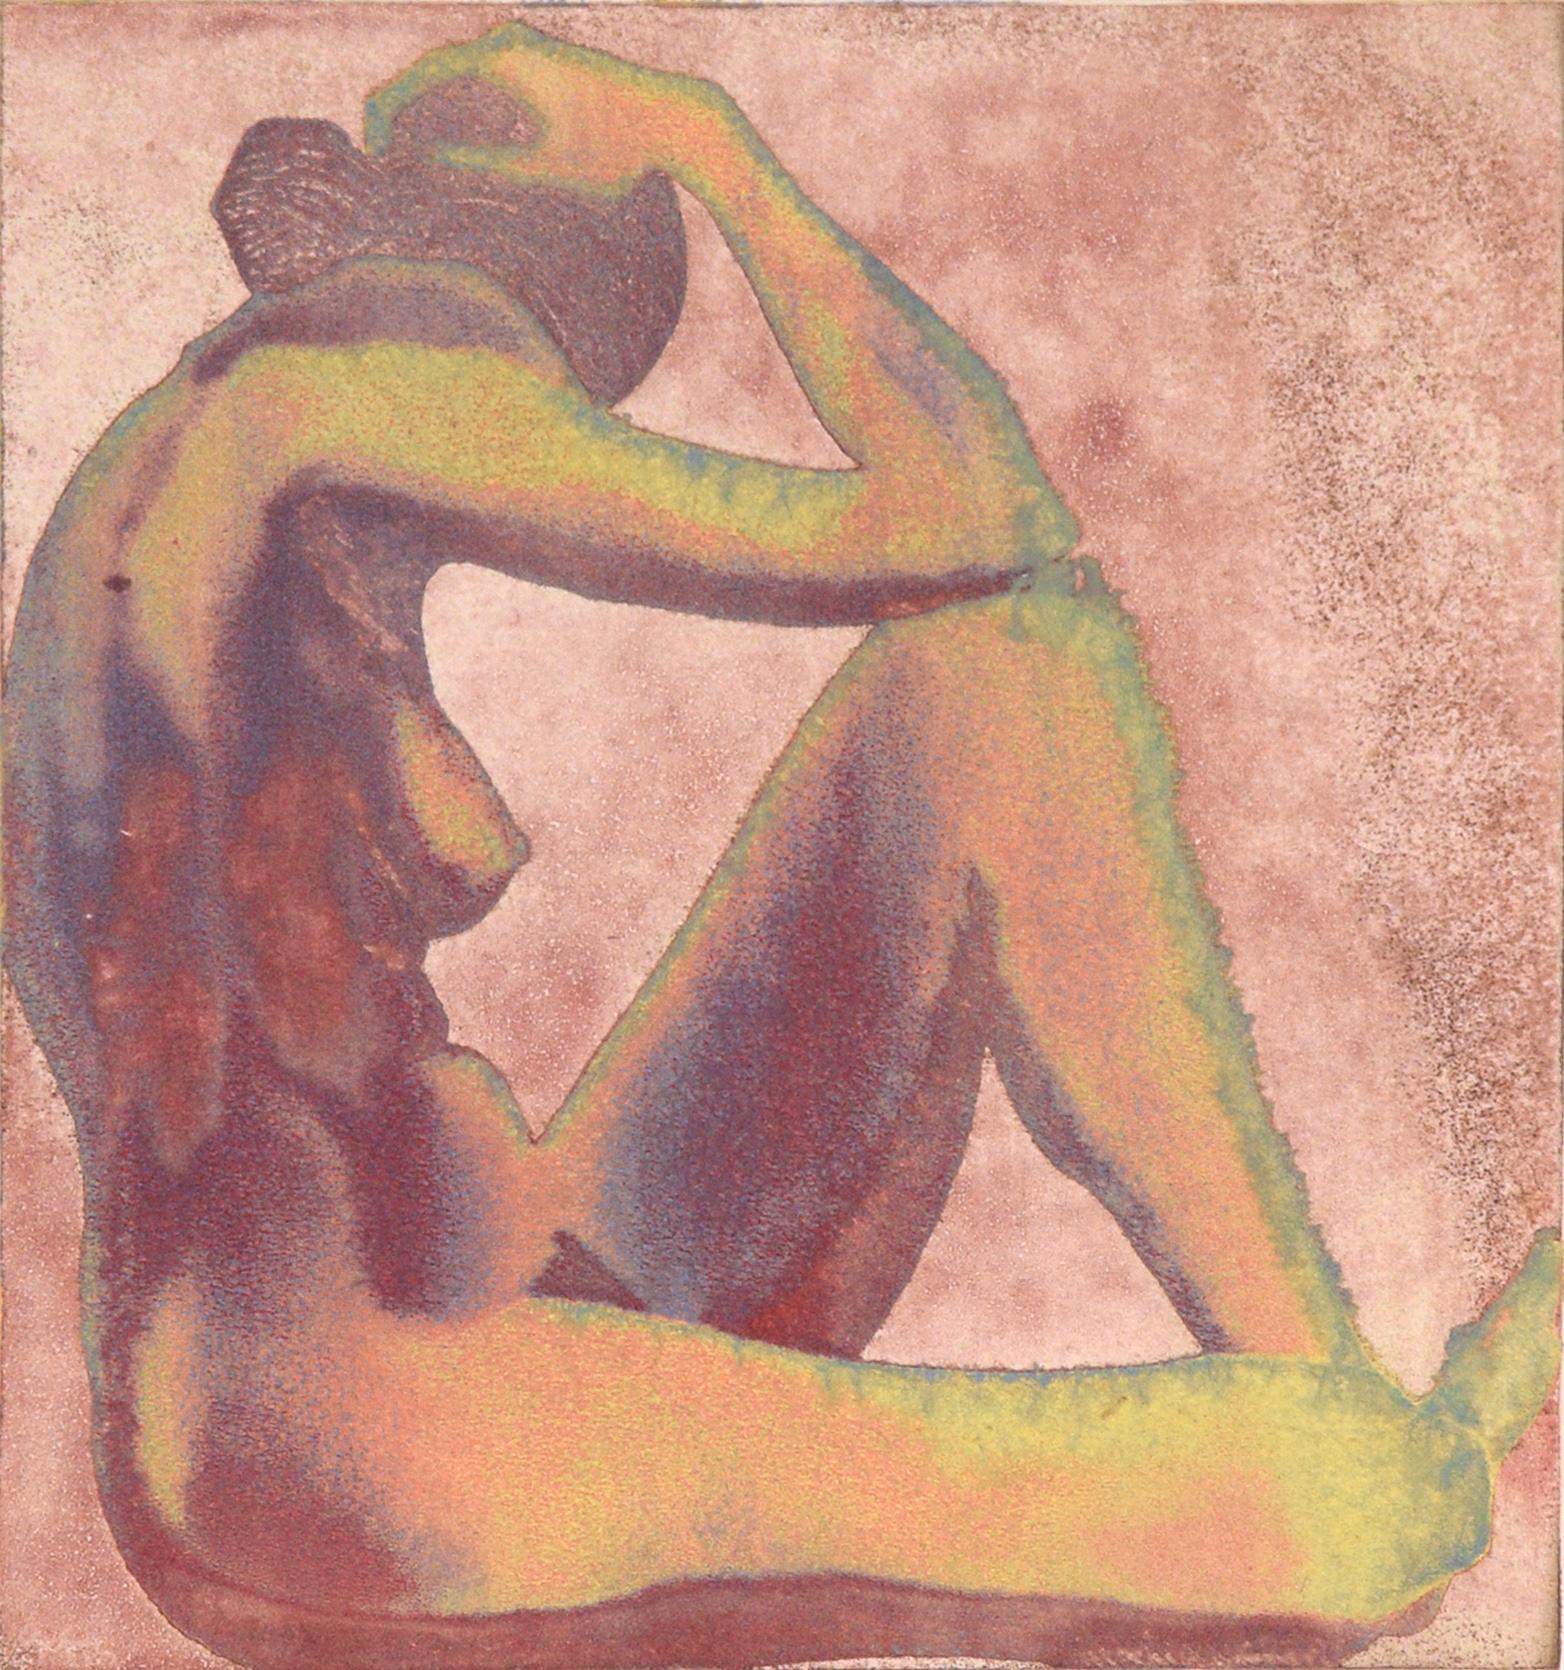 Vintage Figurative Nude - Steel Plate Etching - Print by Patricia A Pearce